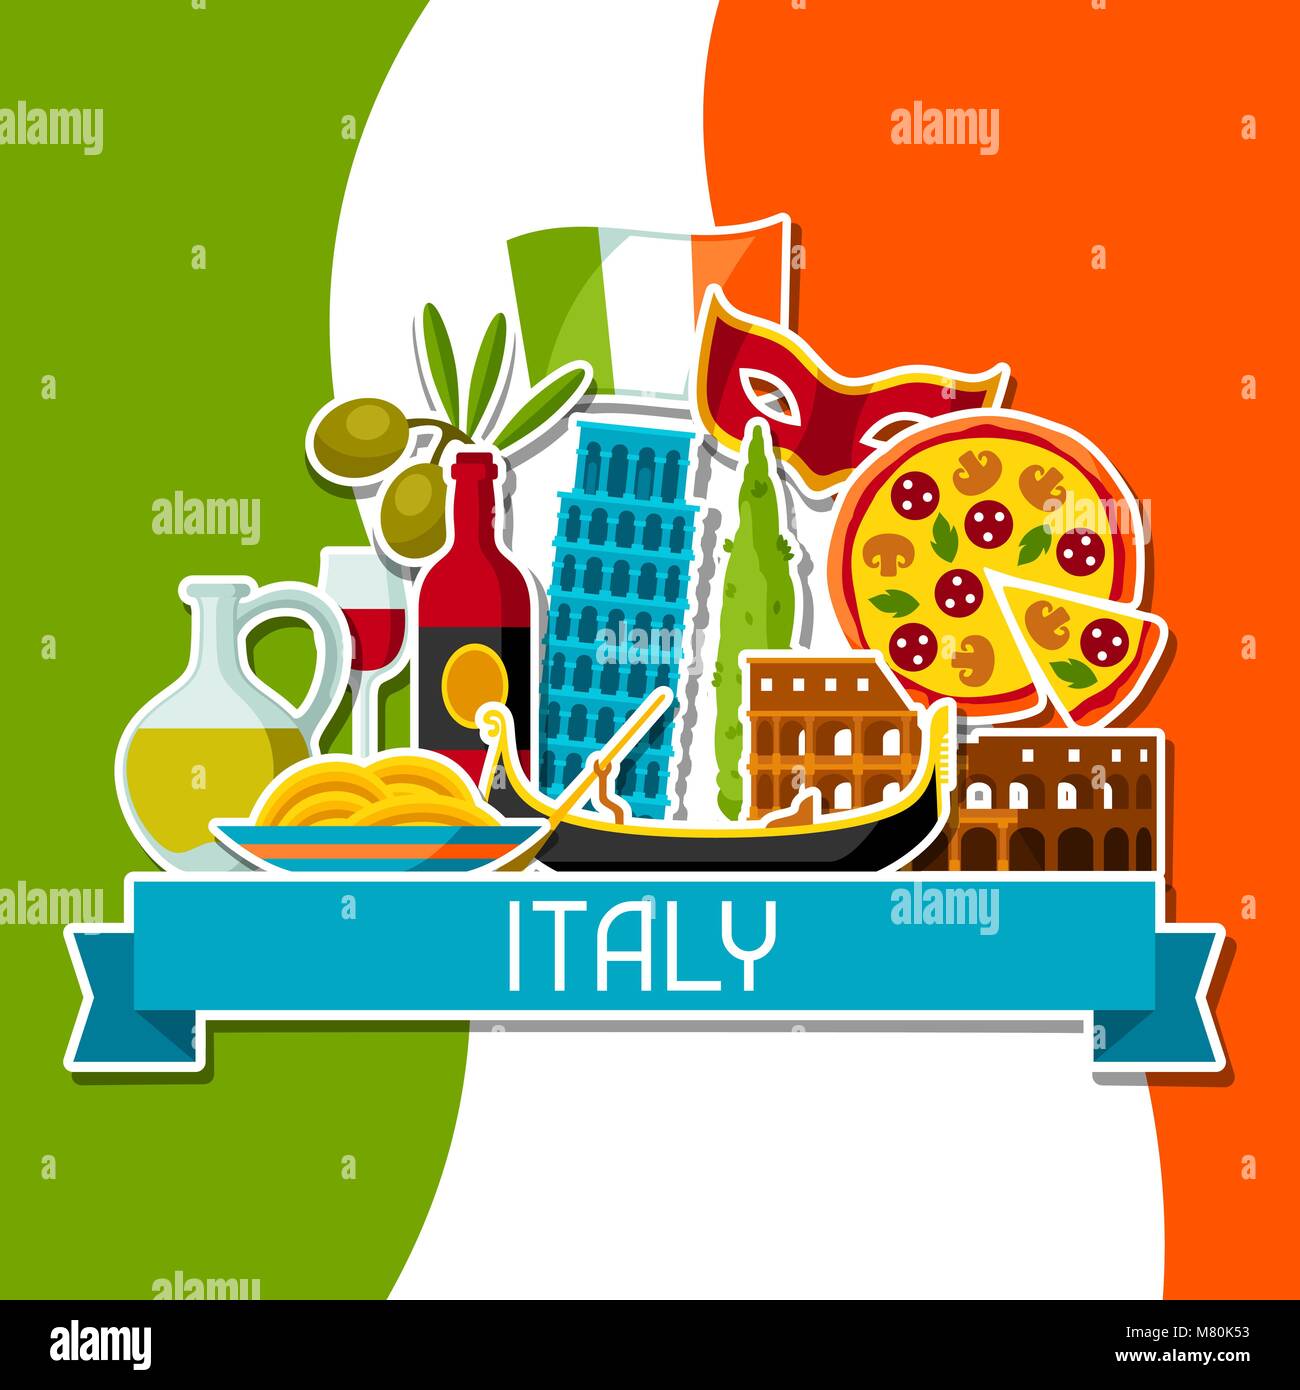 Italy background design. Italian sticker symbols and objects Stock Vector